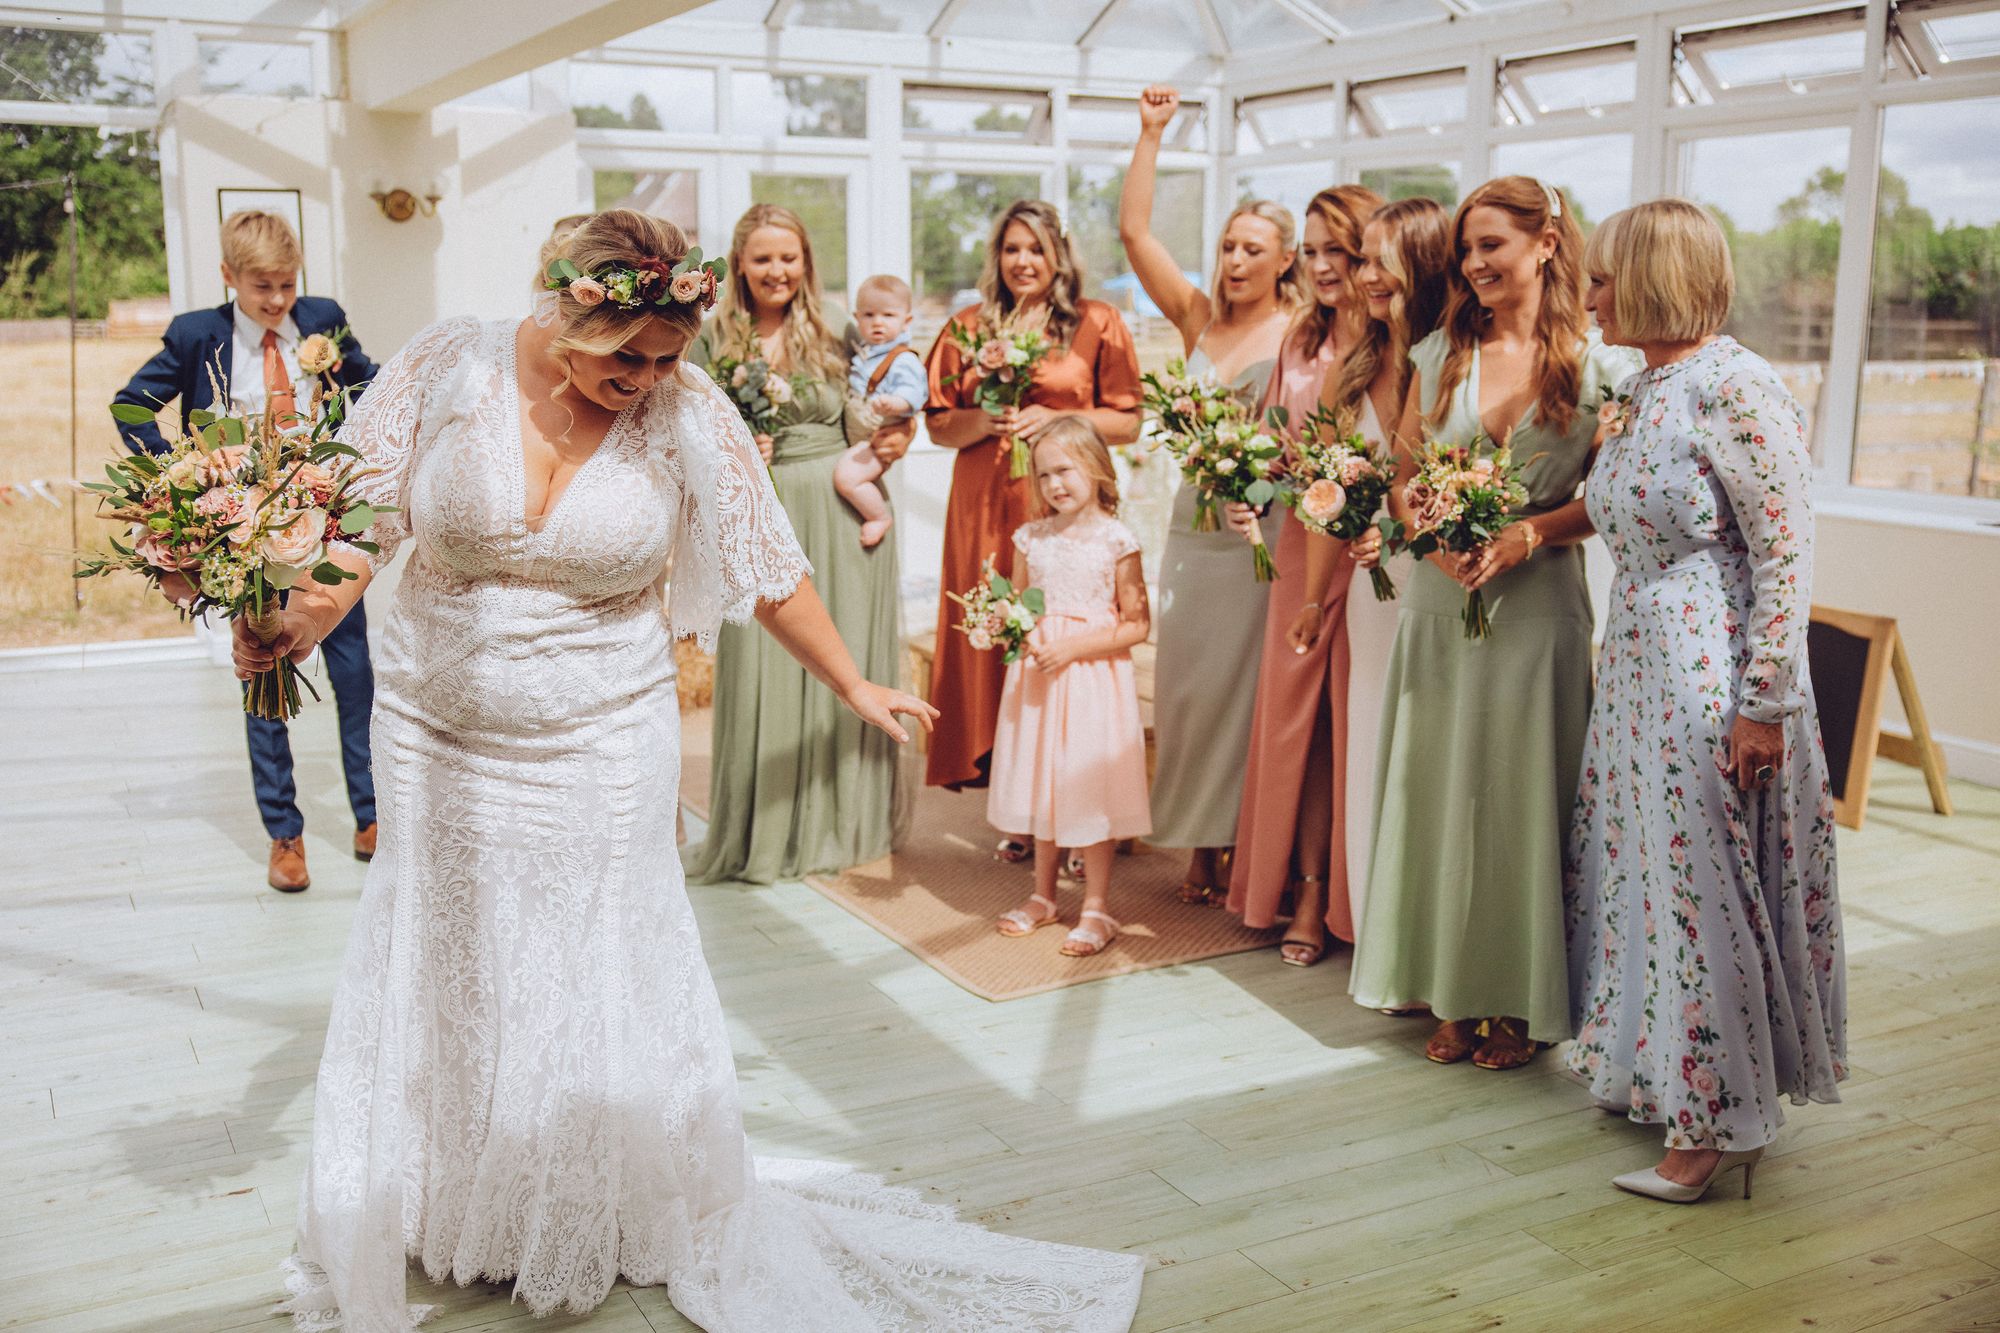 Nor revealing her lace wedding dress to her bridal party in the farm conservatory prior to the ceremony. Photo thanks to Fordtography.